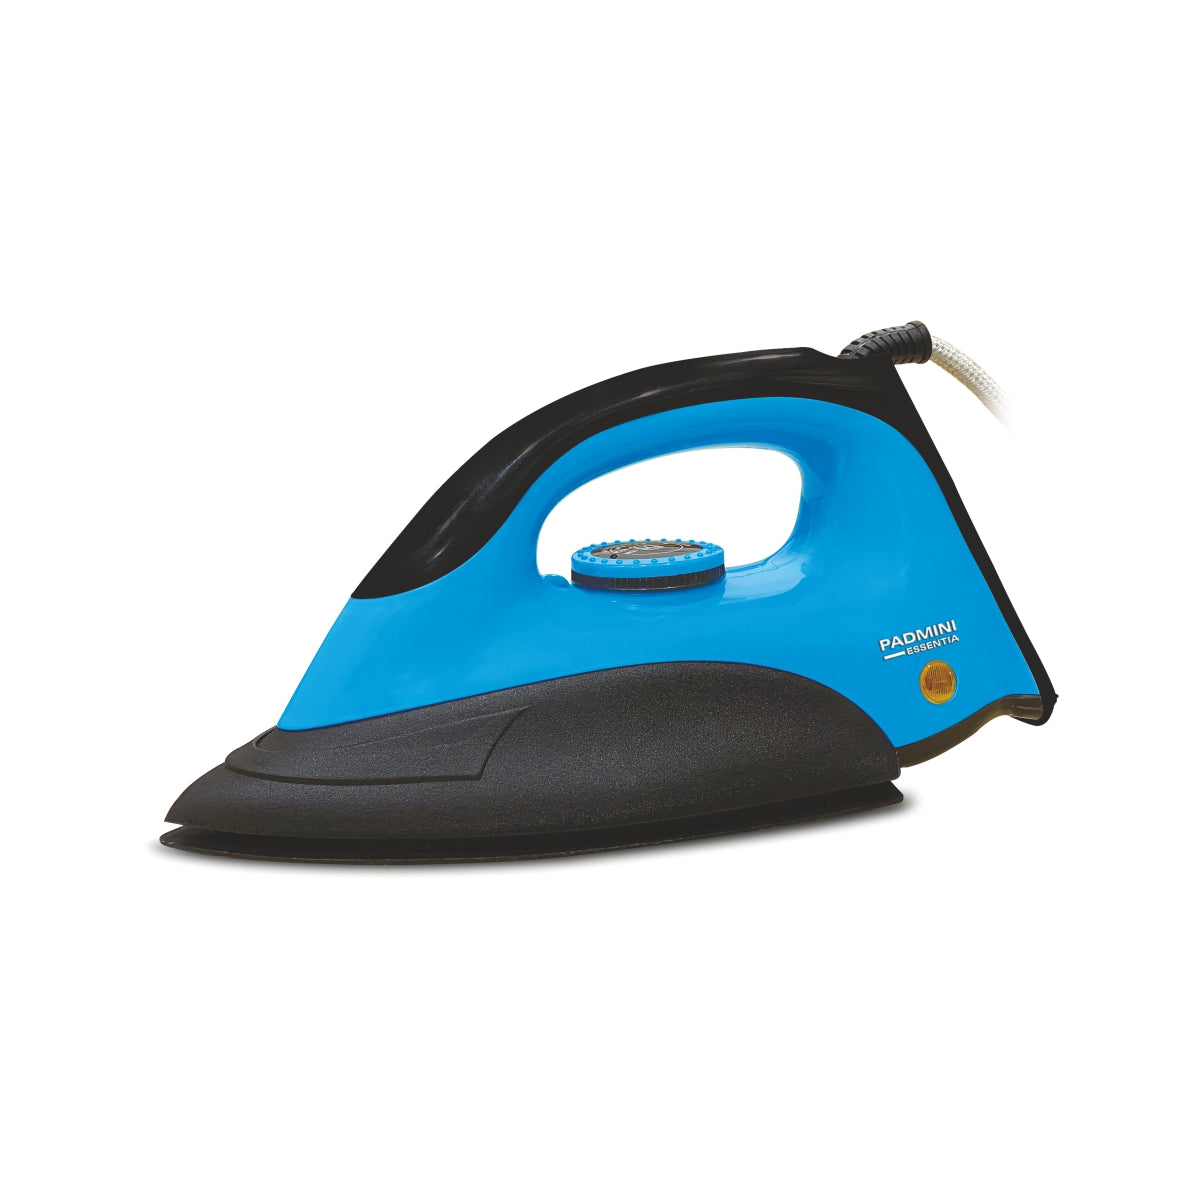 Dry Iron: Buy Dry Iron Online at Best Price in India